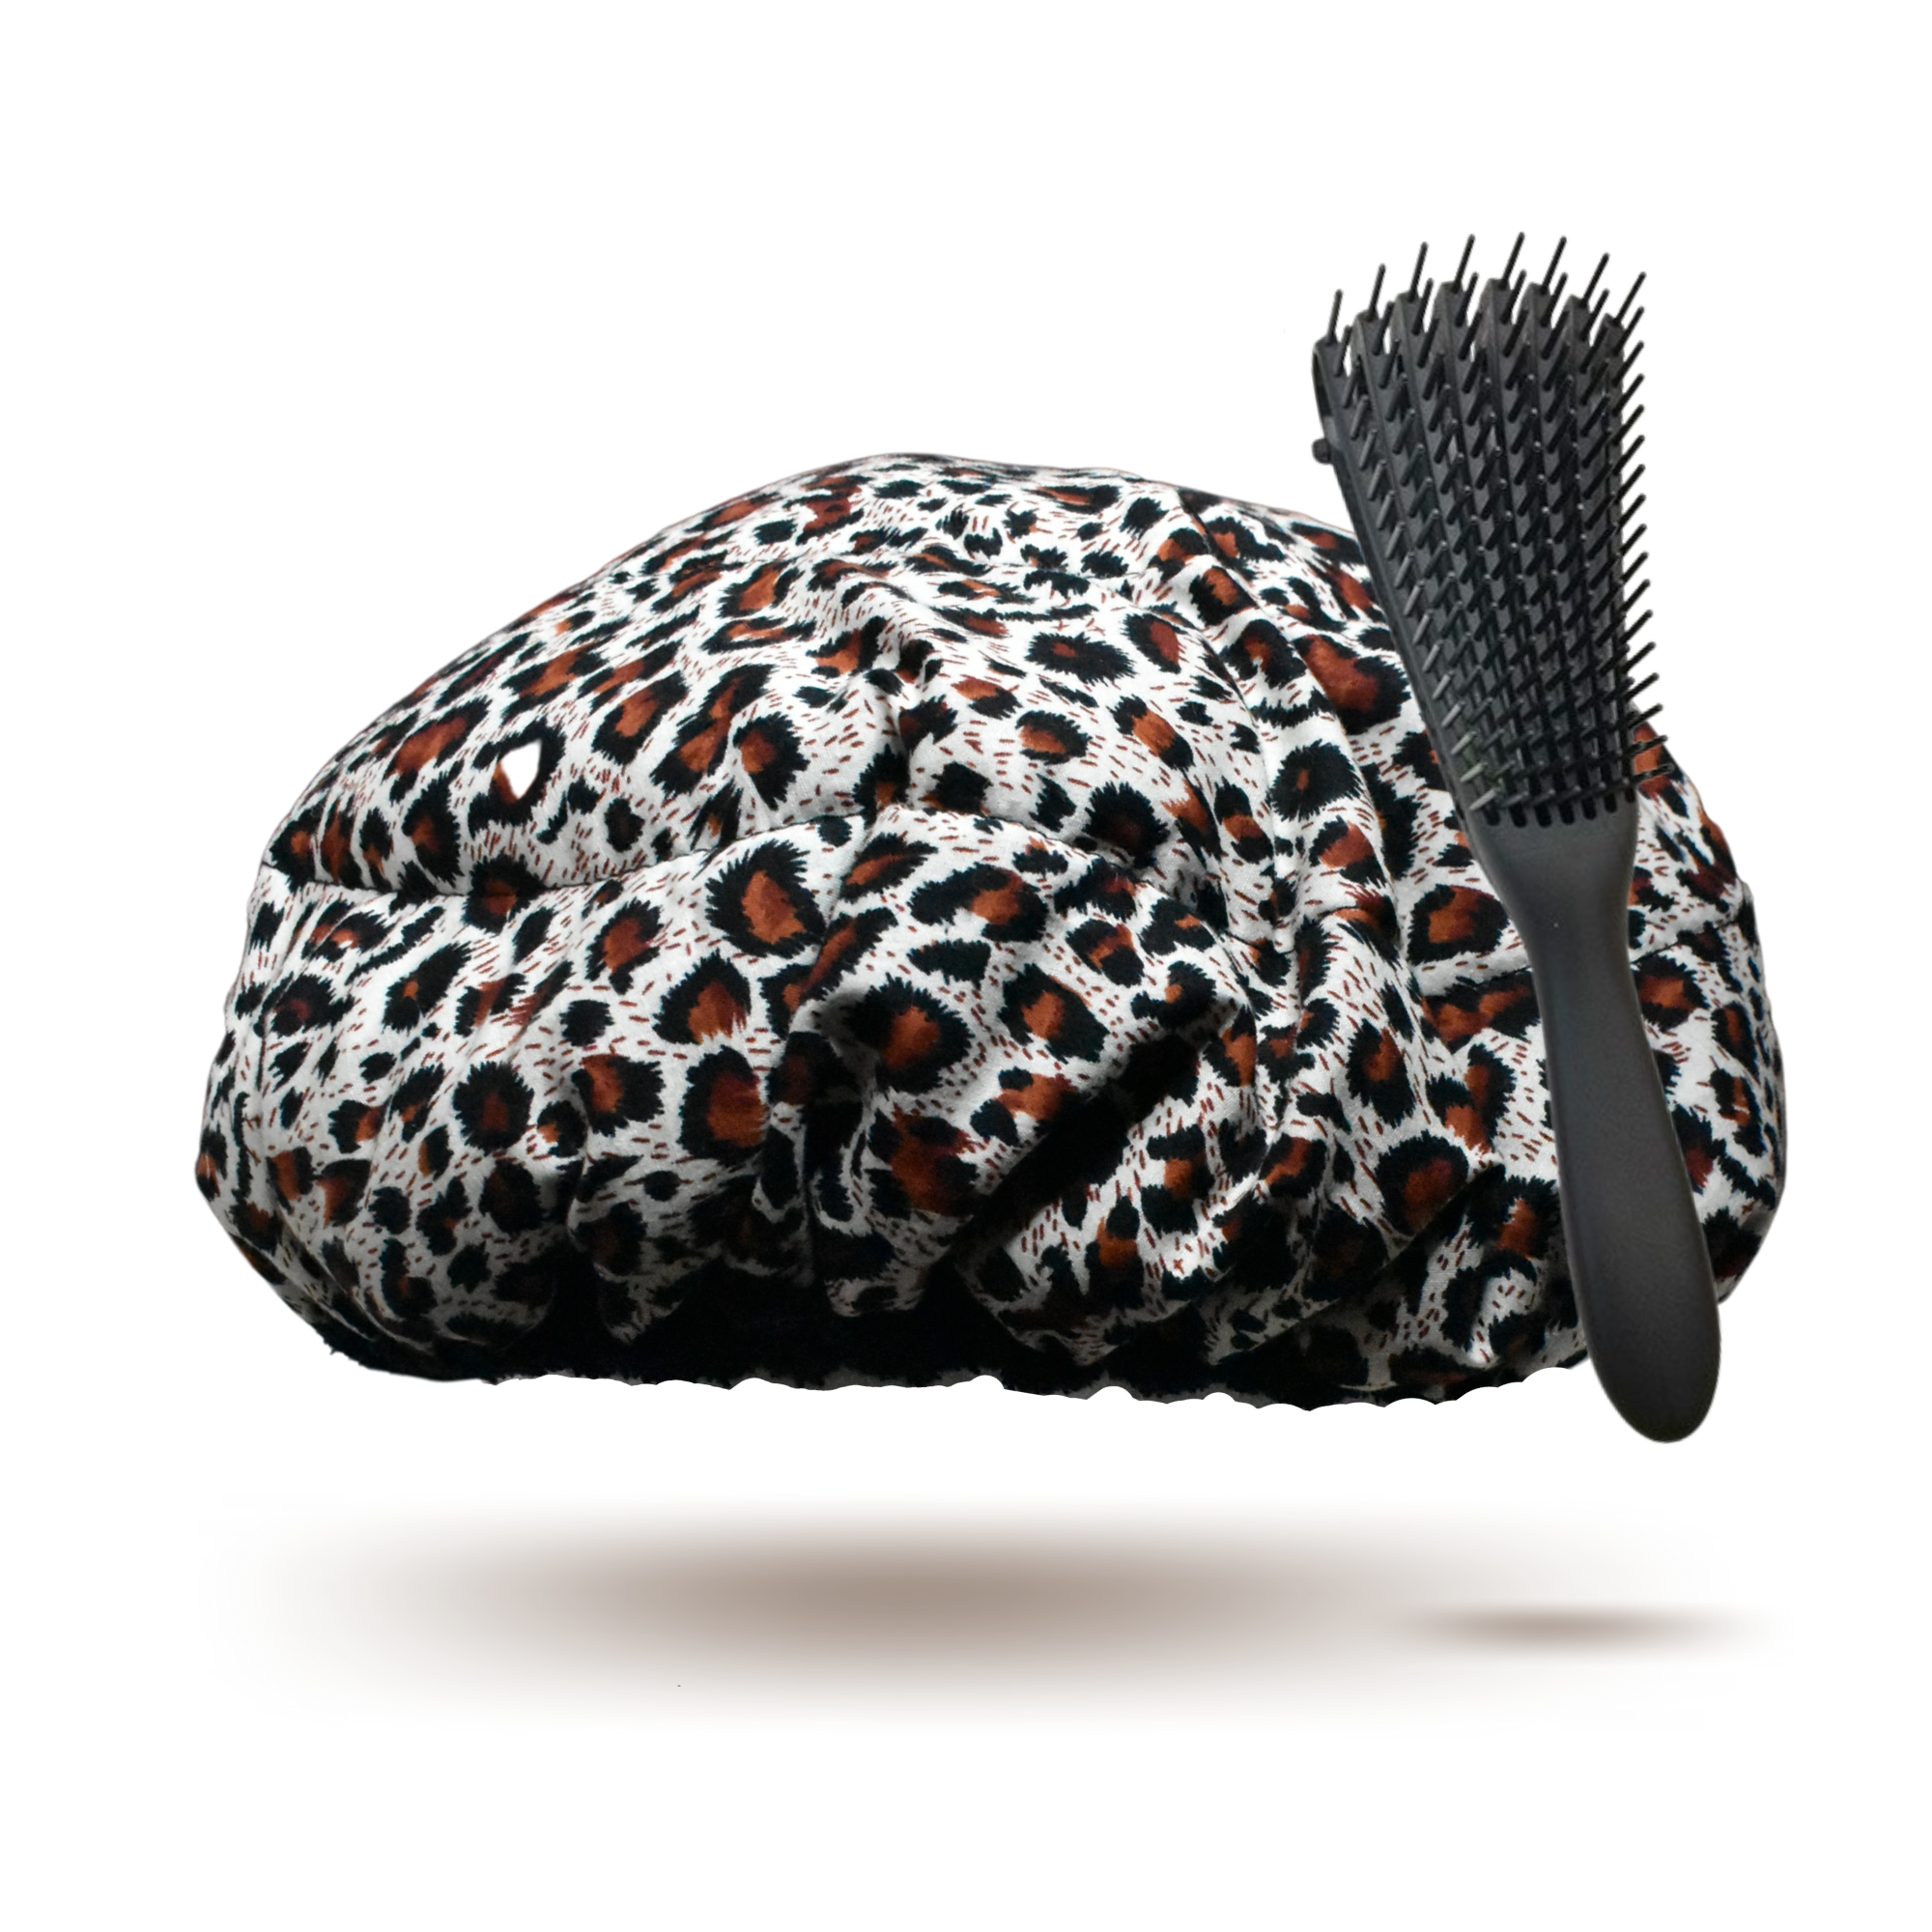 Lava Cap microwavable heat cap UK stock, with detangling hairbrush in leopard print